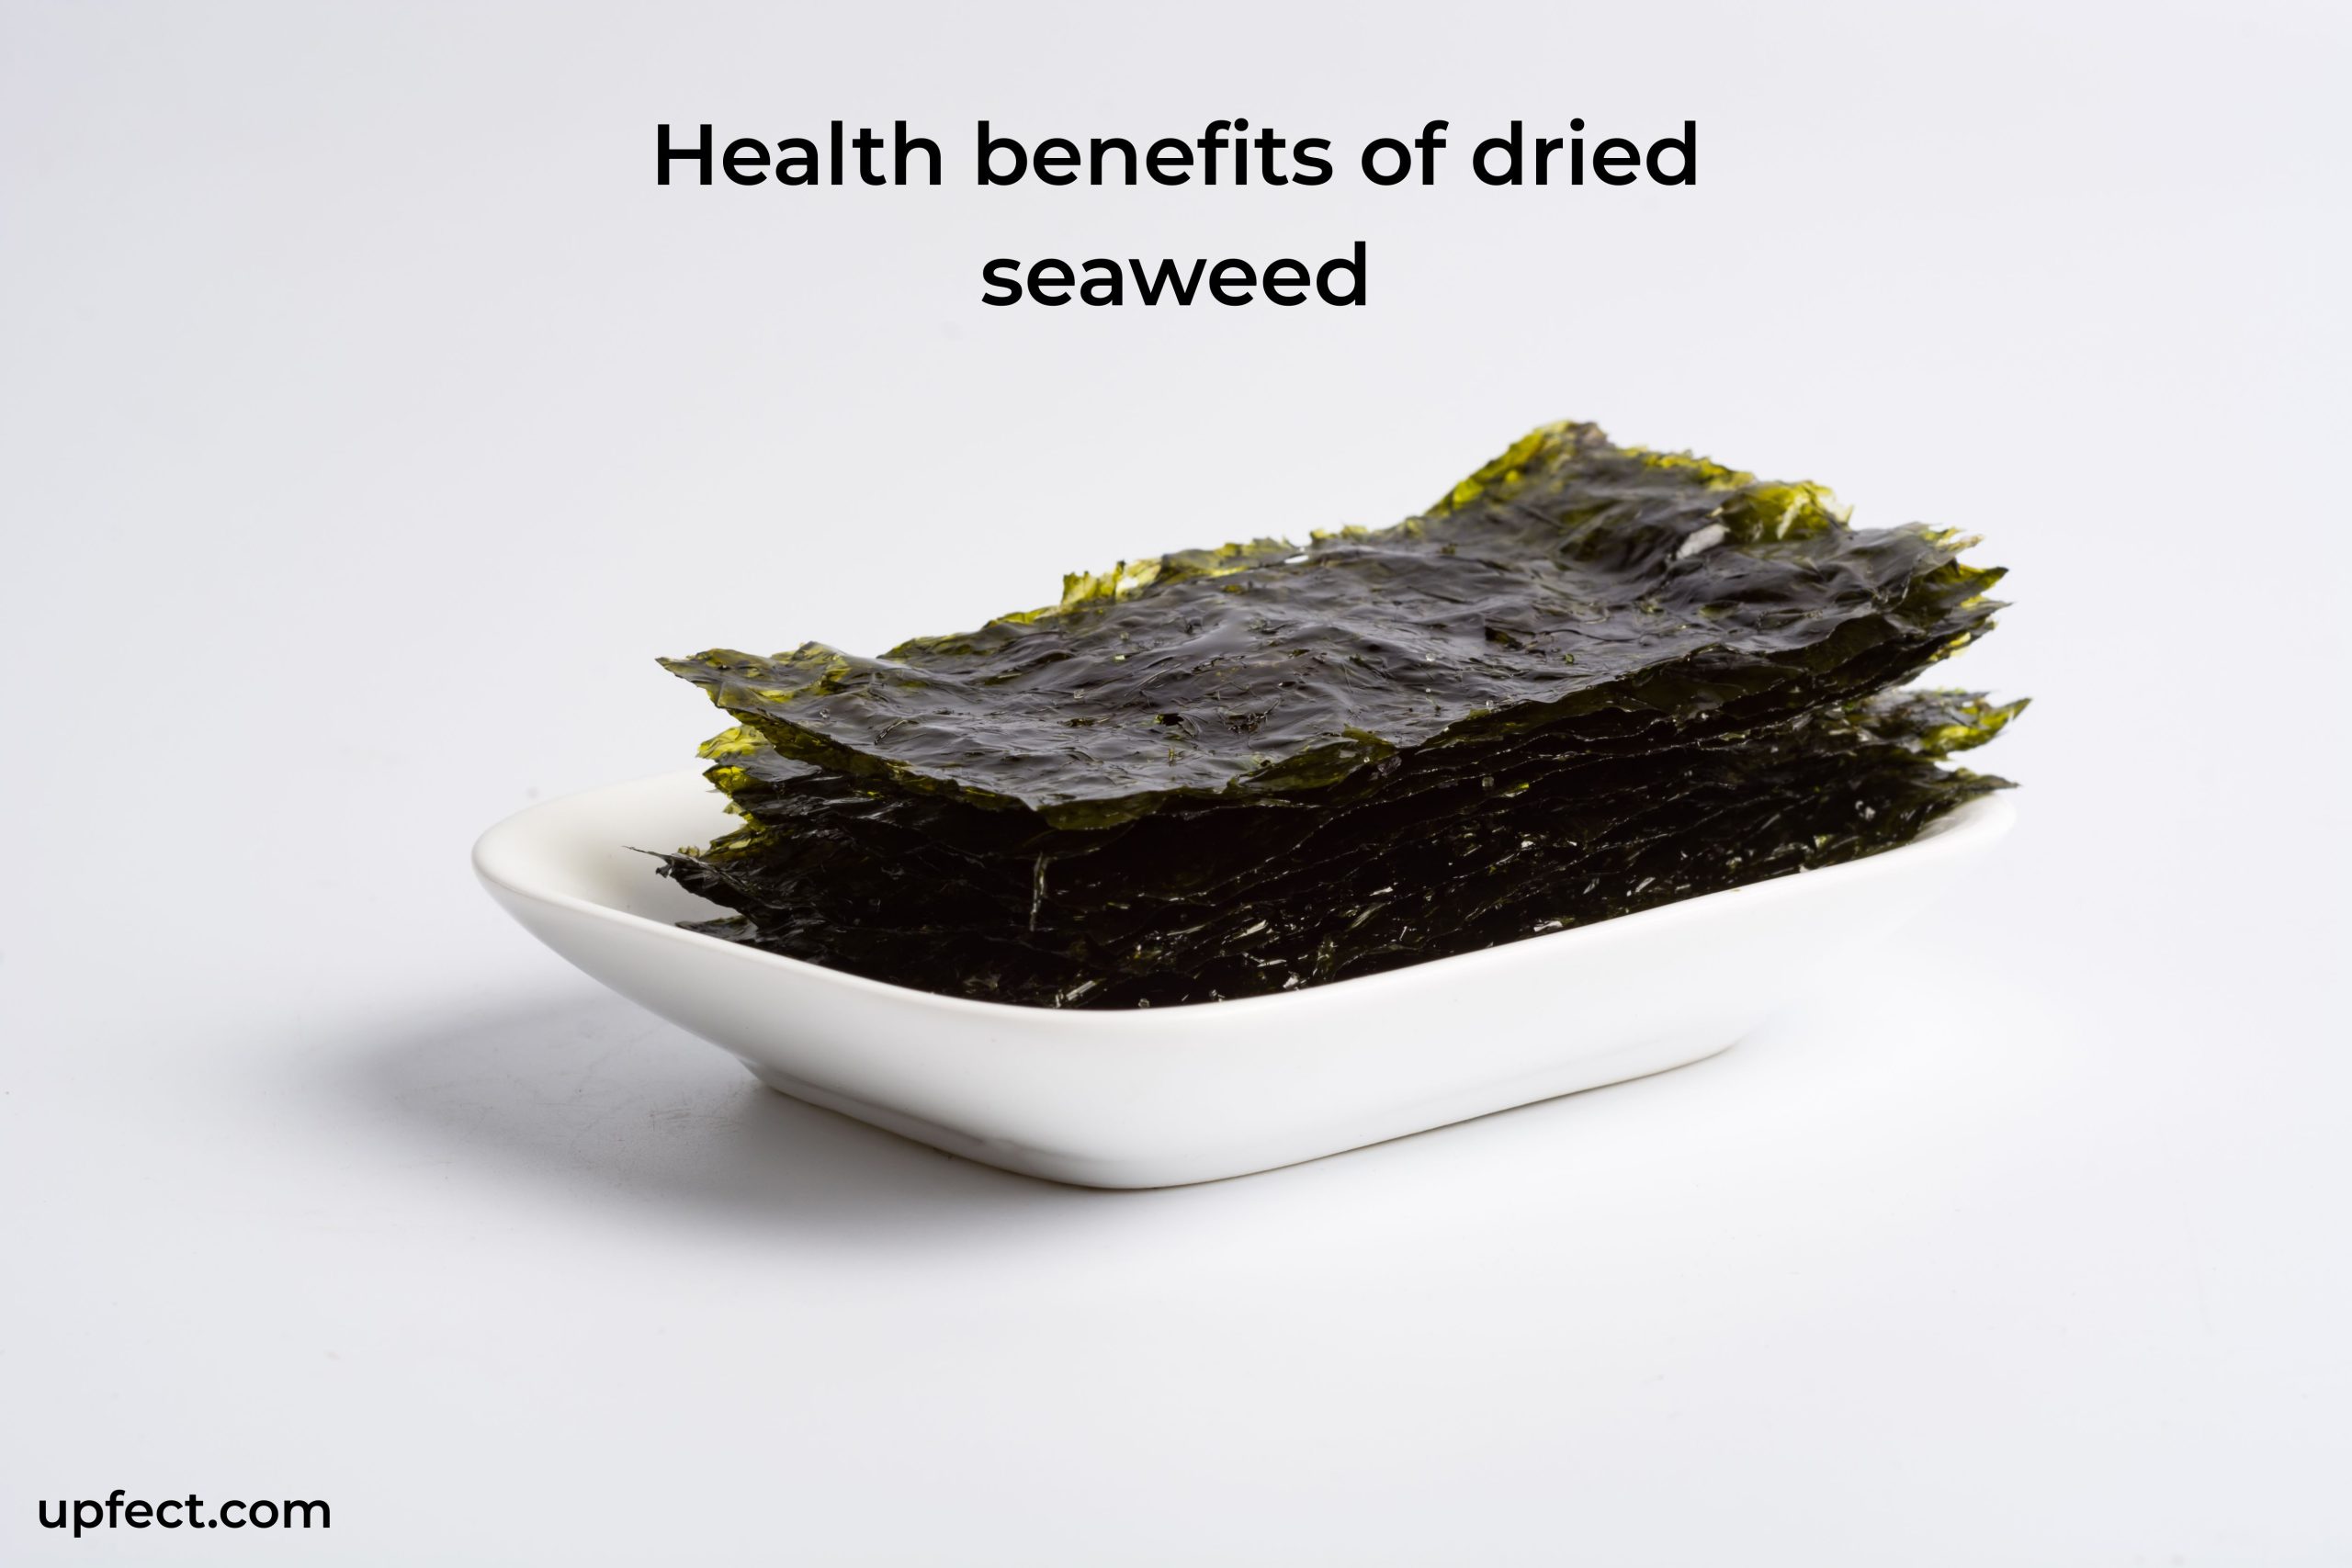 can i eat dried seaweed everyday